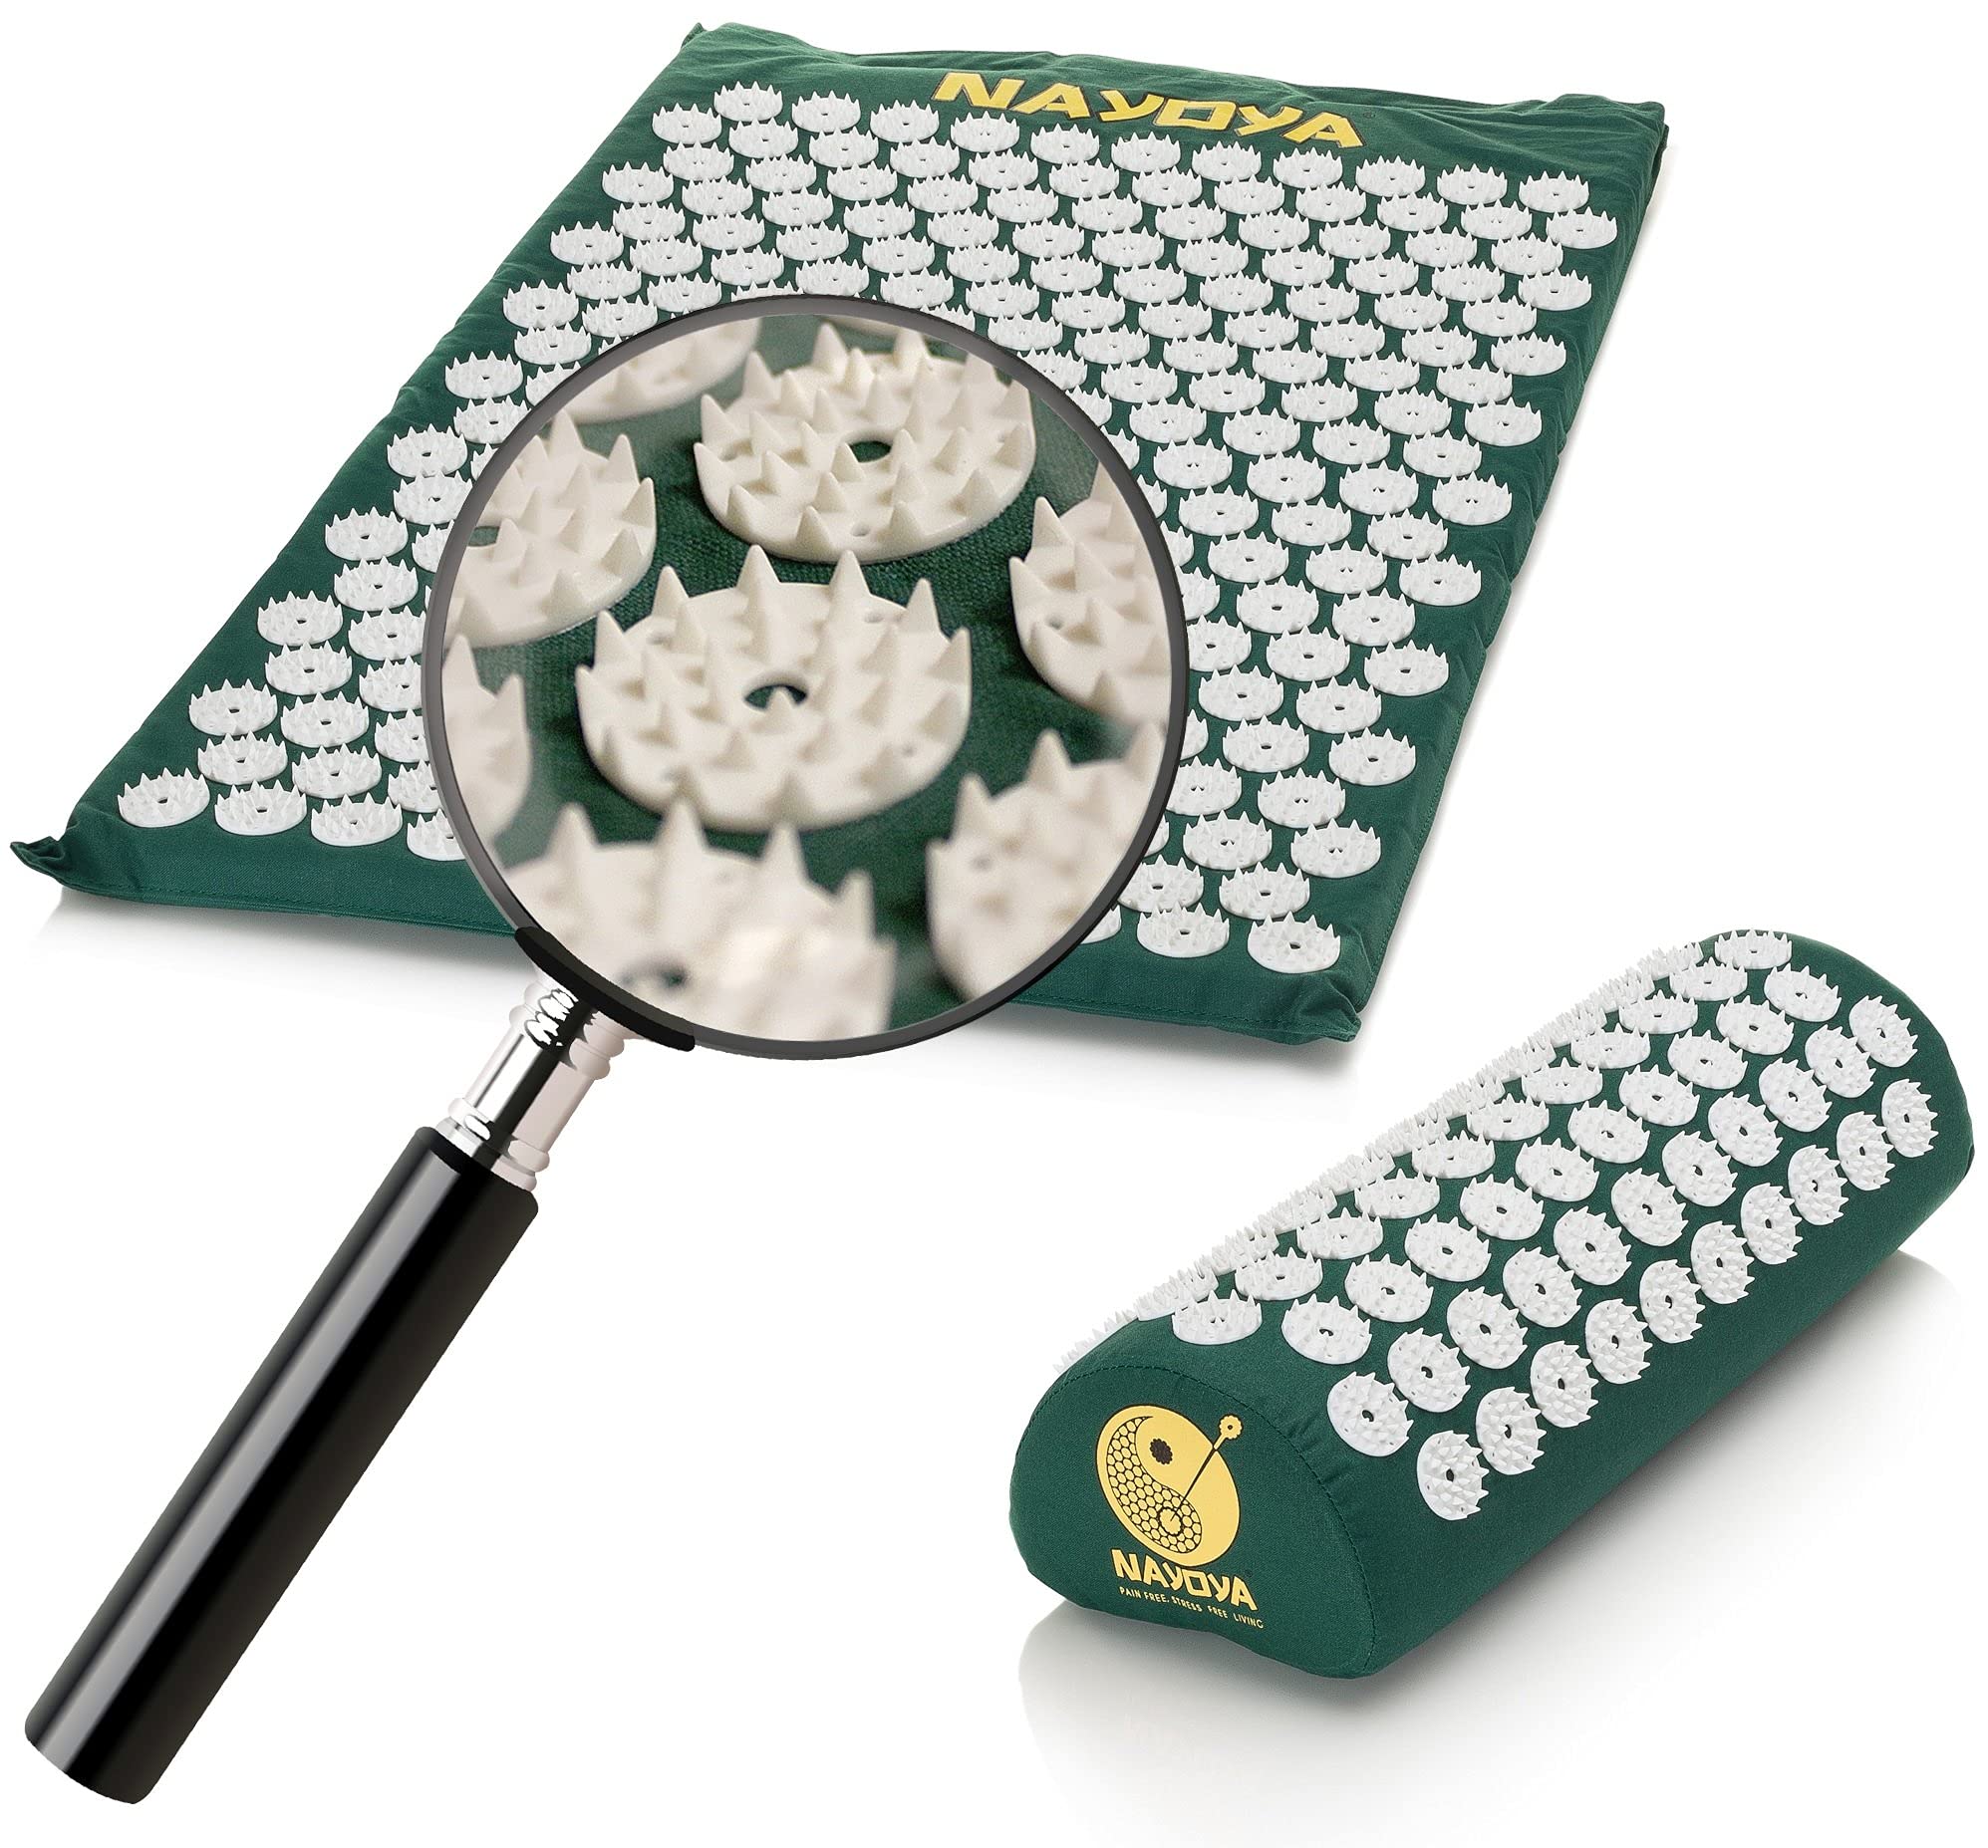 NAYOYA Neck and Back Pain Relief - Acupressure Mat and Neck Pillow Set - Relieves Stress and Sciatic Pain for Optimal Health and Wellness - Comes in a Carry Box with Handle for Storage and Travel